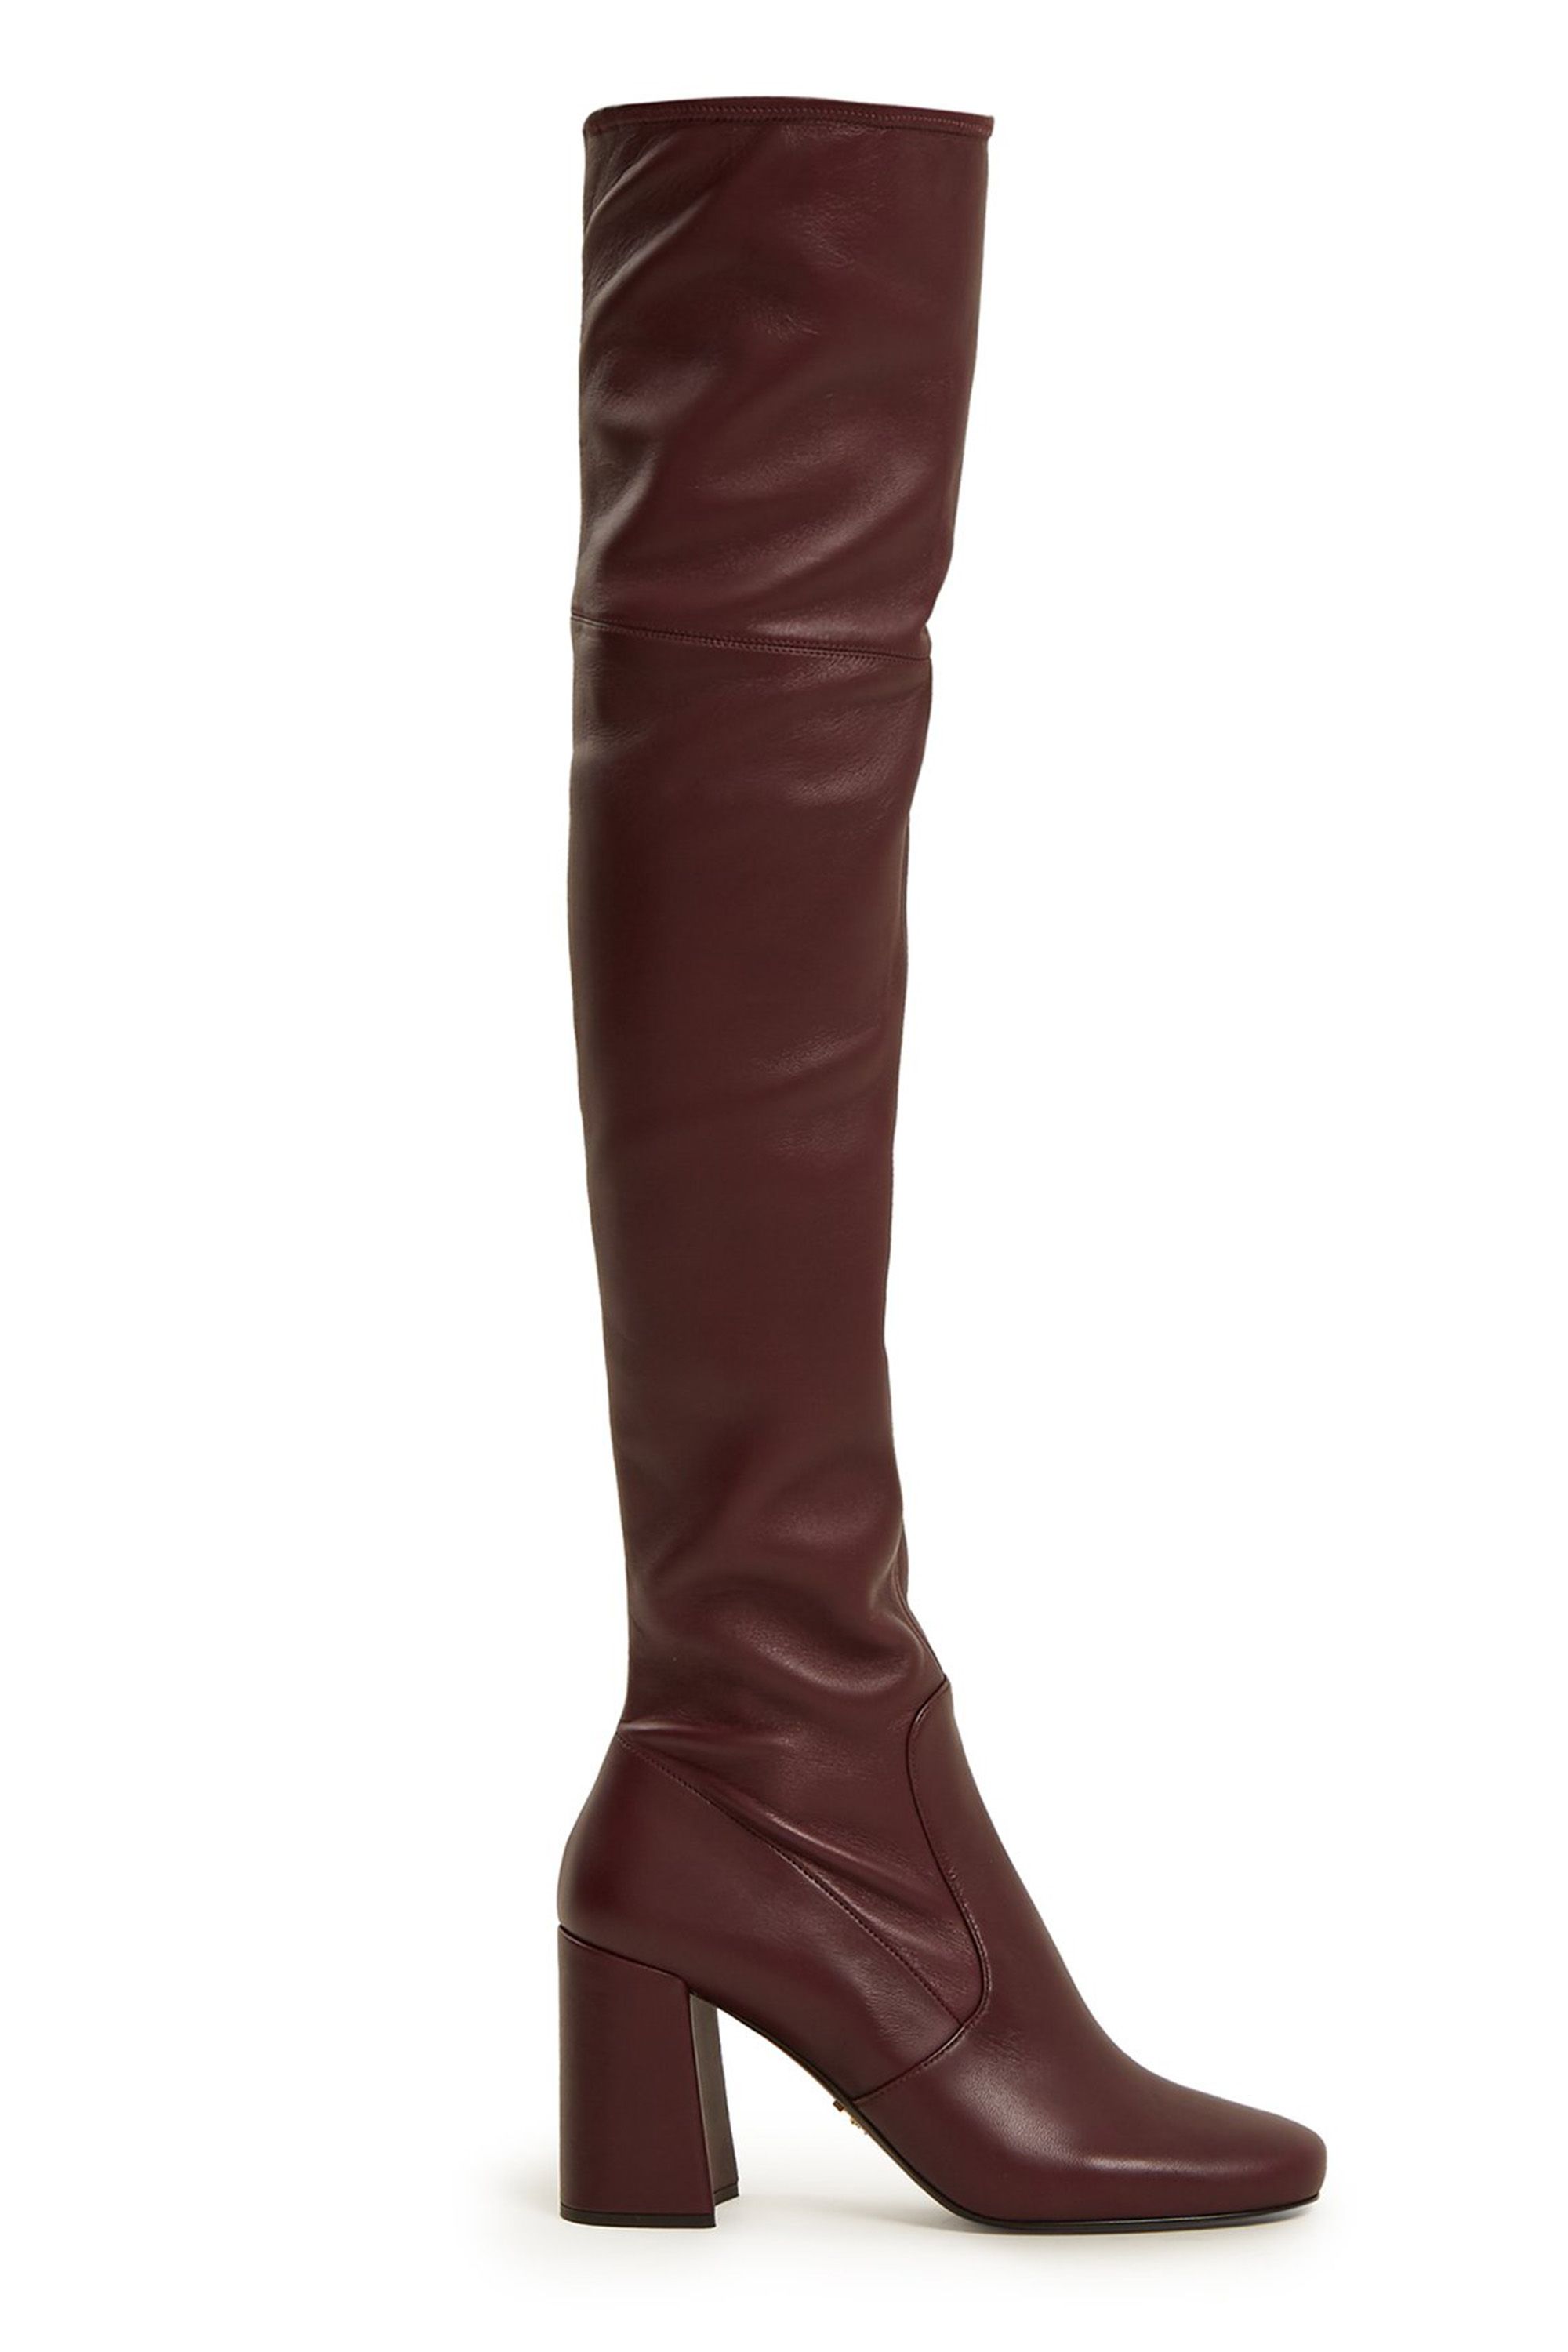 top over the knee boots